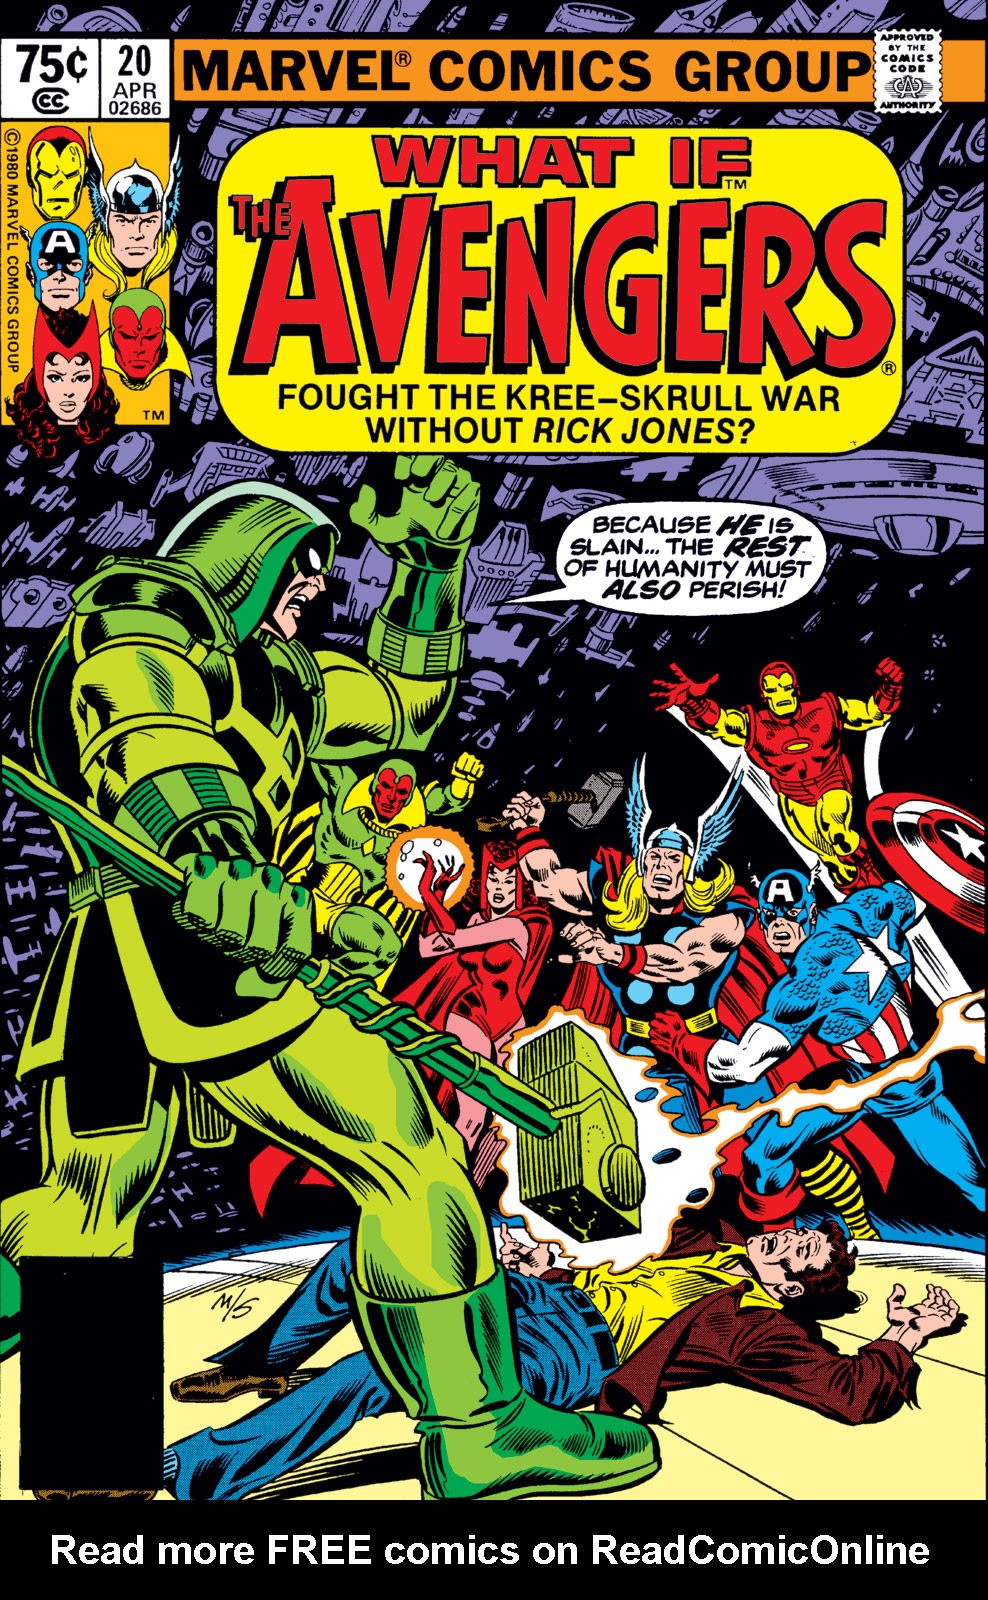 <{ $series->title }} issue 20 - The Avengers fought the Kree-Skrull war without Rick Jones - Page 1